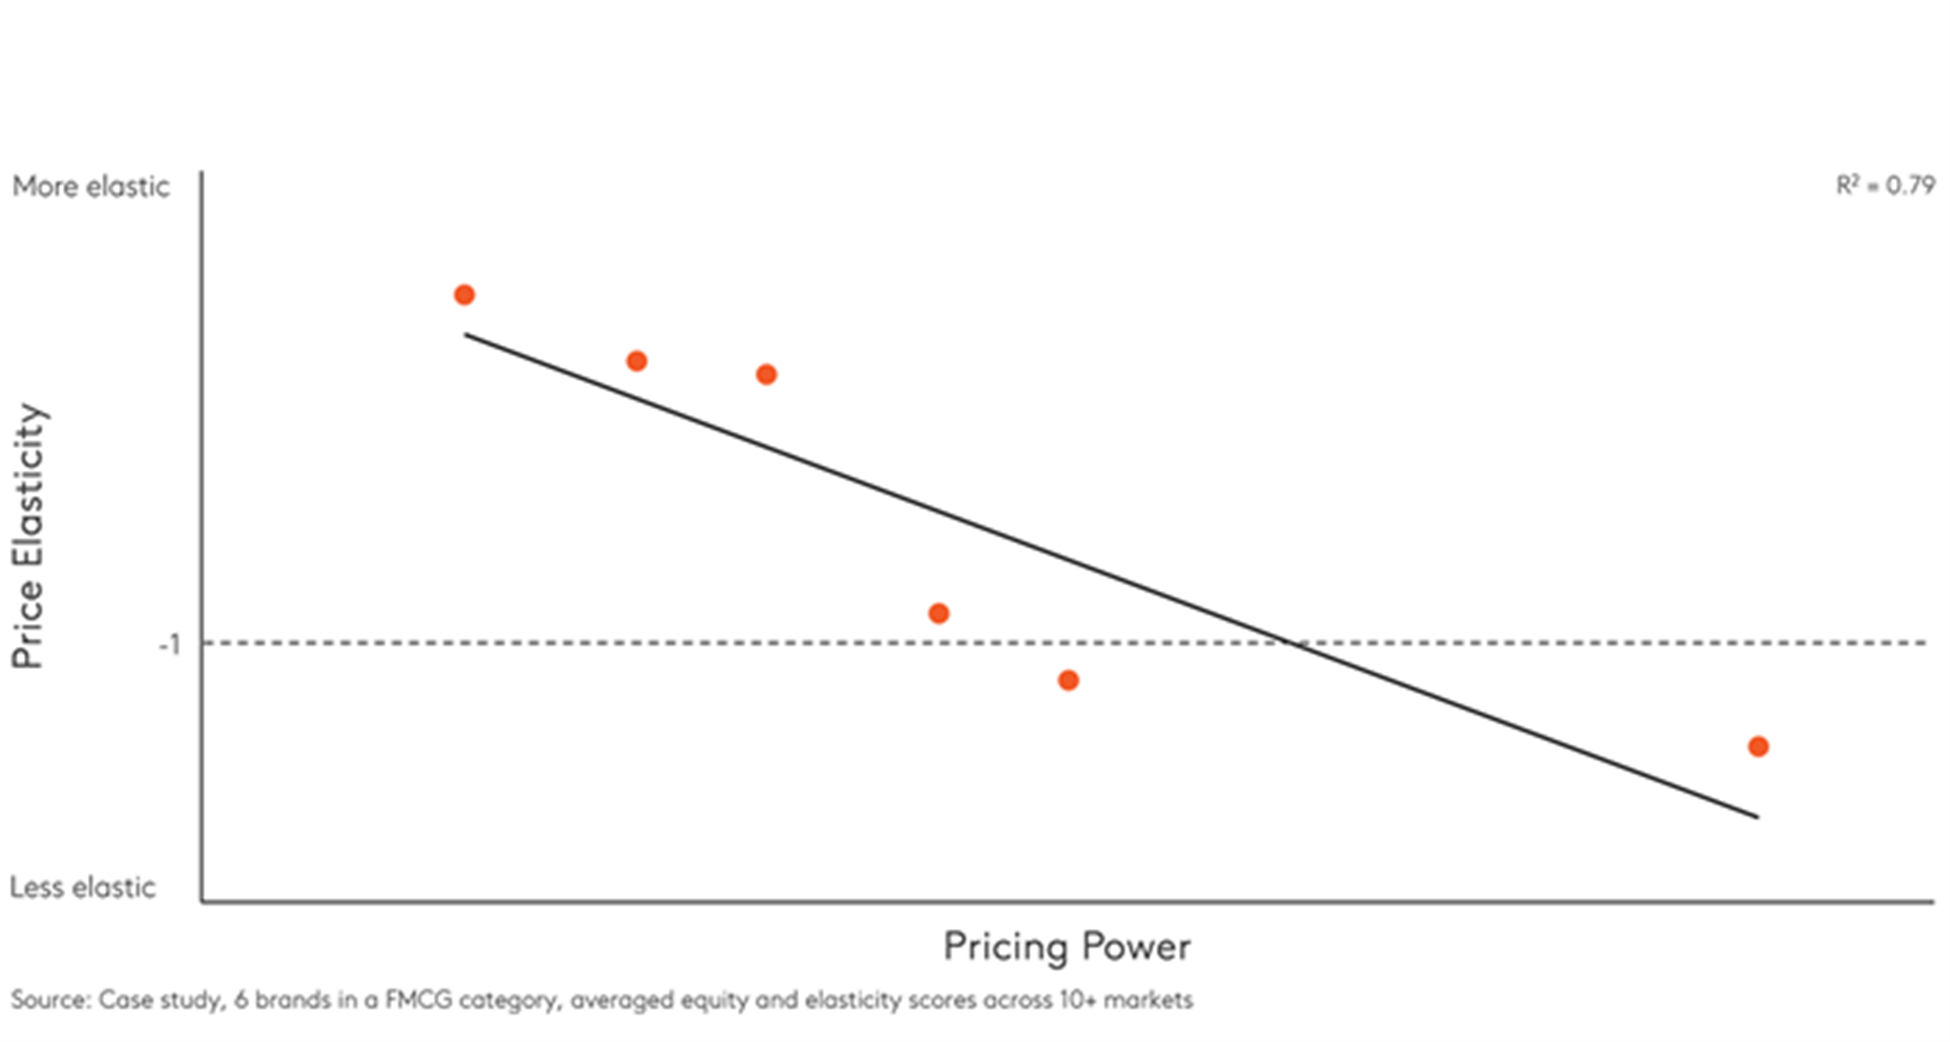 Higher pricing power = lower price elasticity 